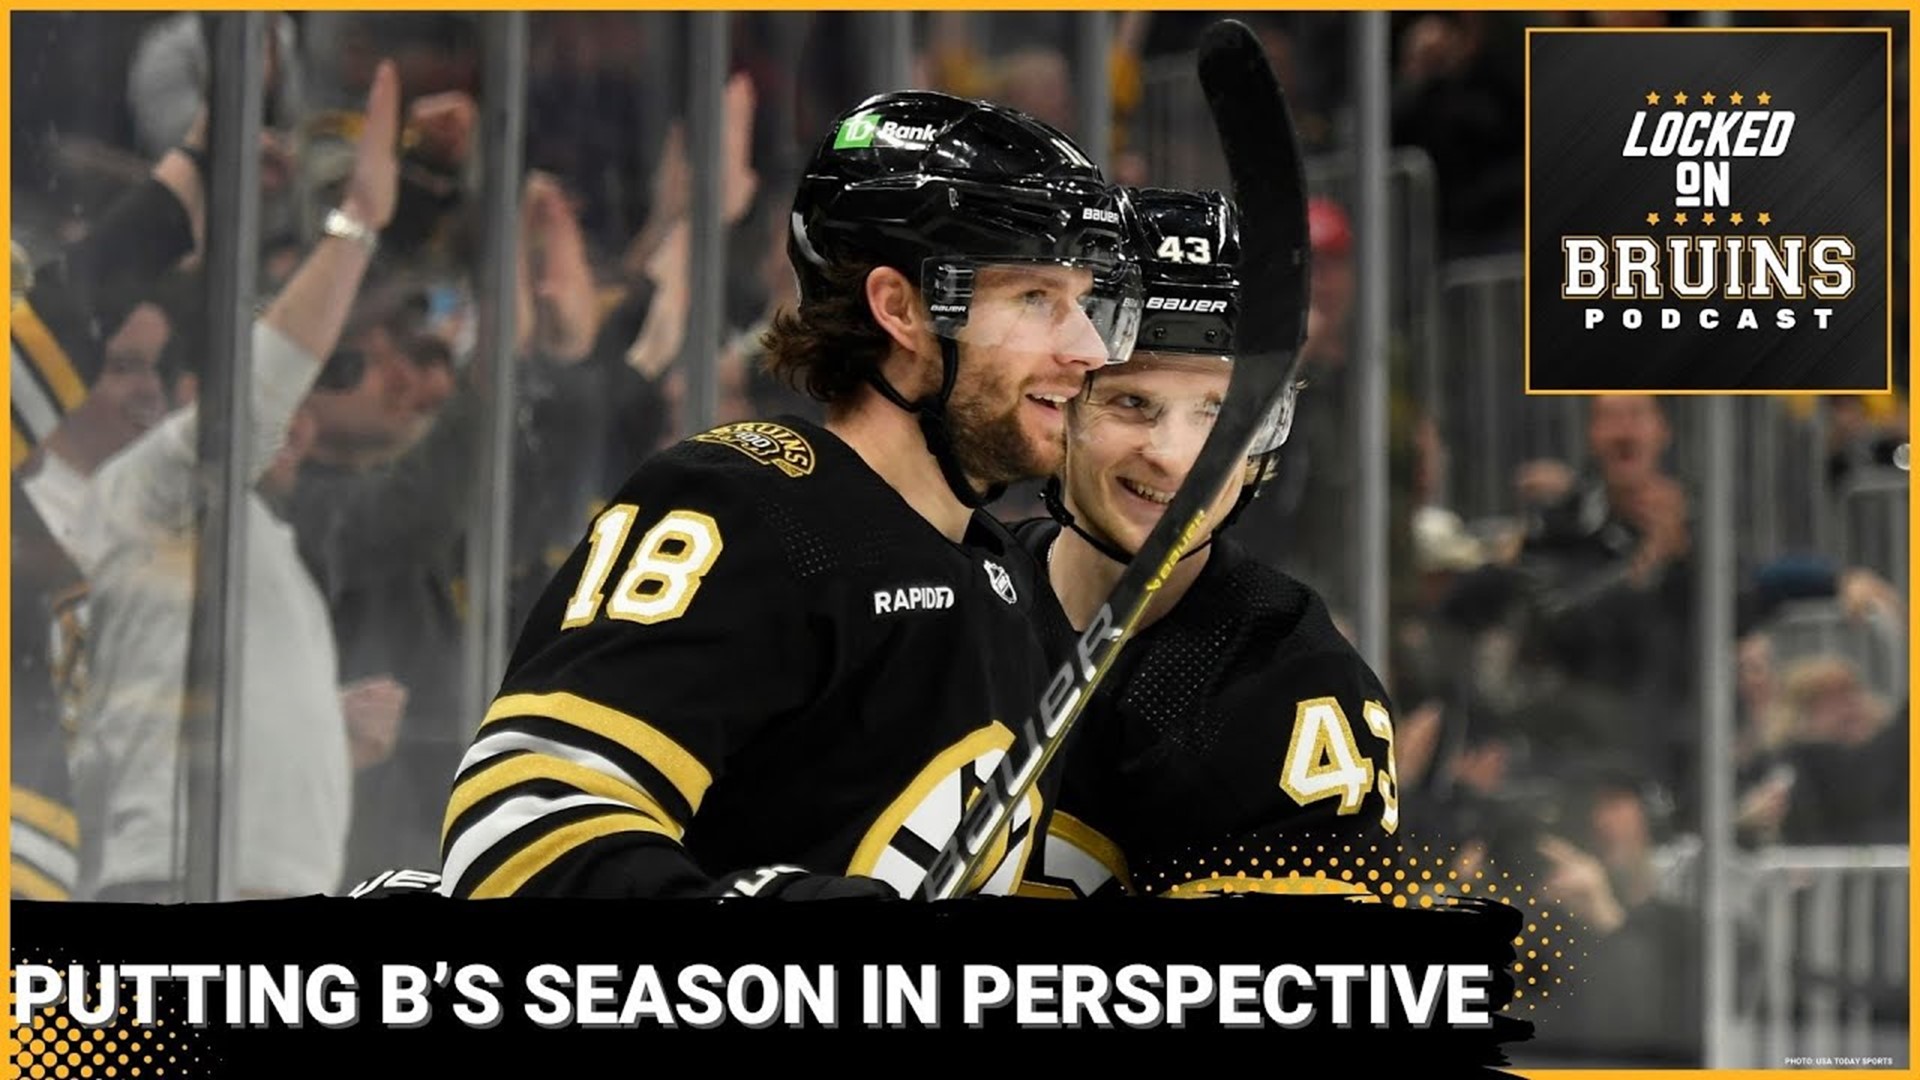 2nd in the Atlantic Division. Putting the Boston Bruins' regular season in perspective